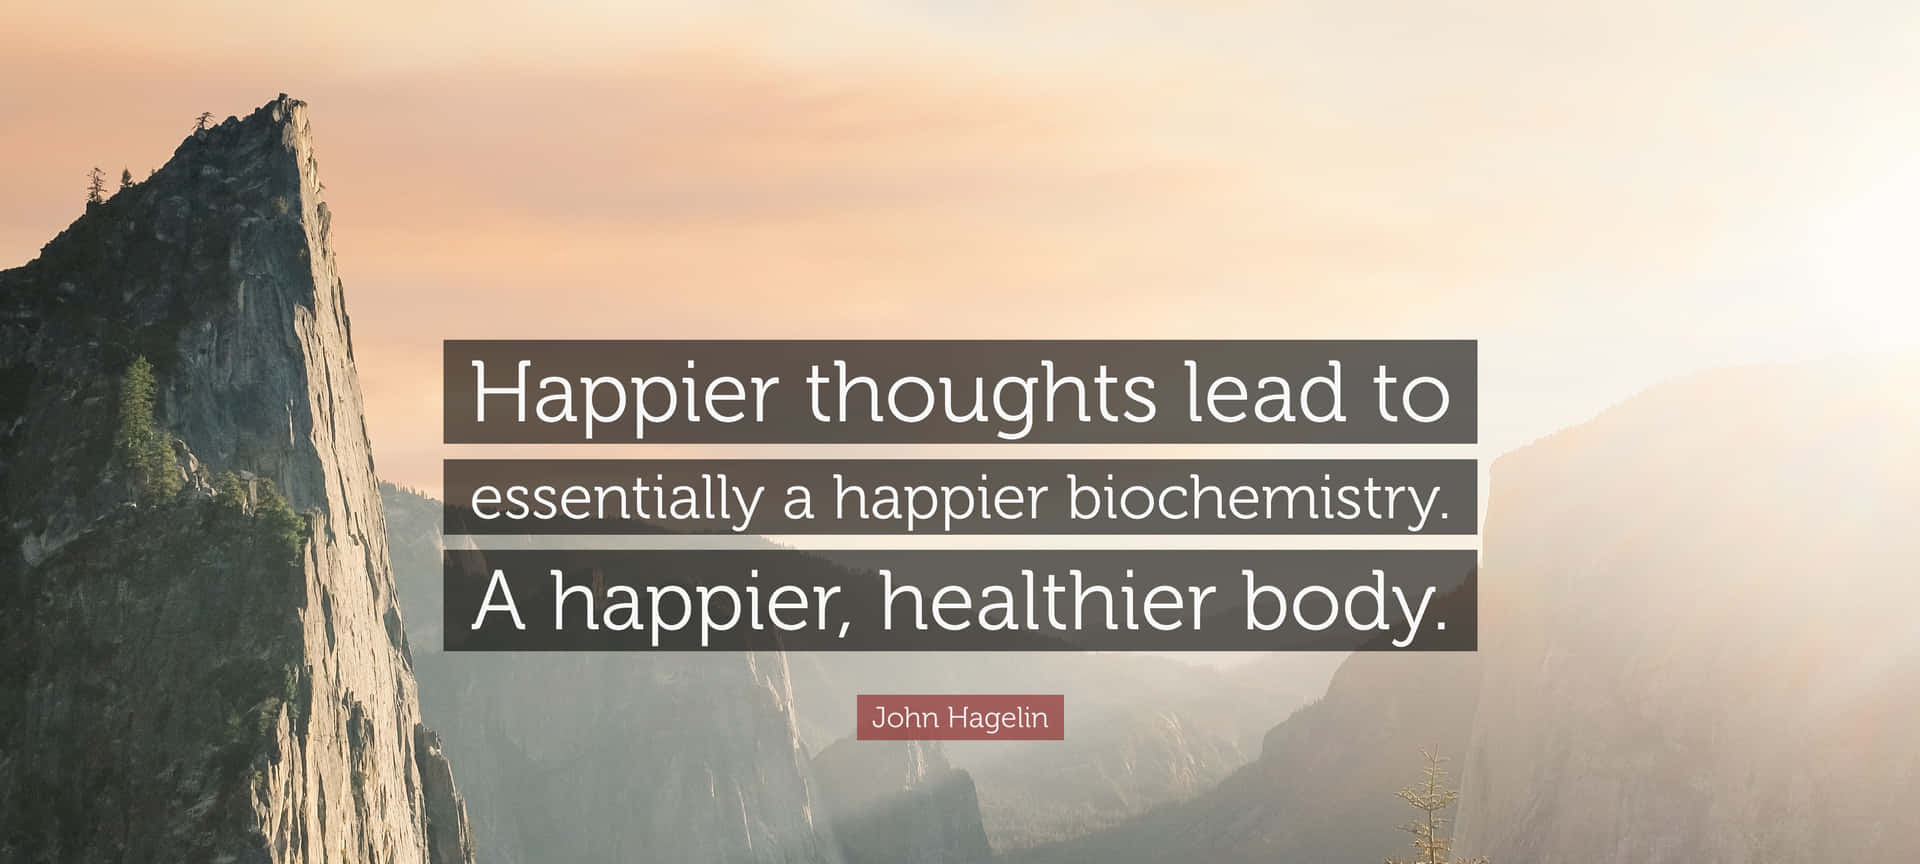 Happier Thoughts Happier Biochemistry Quote Wallpaper